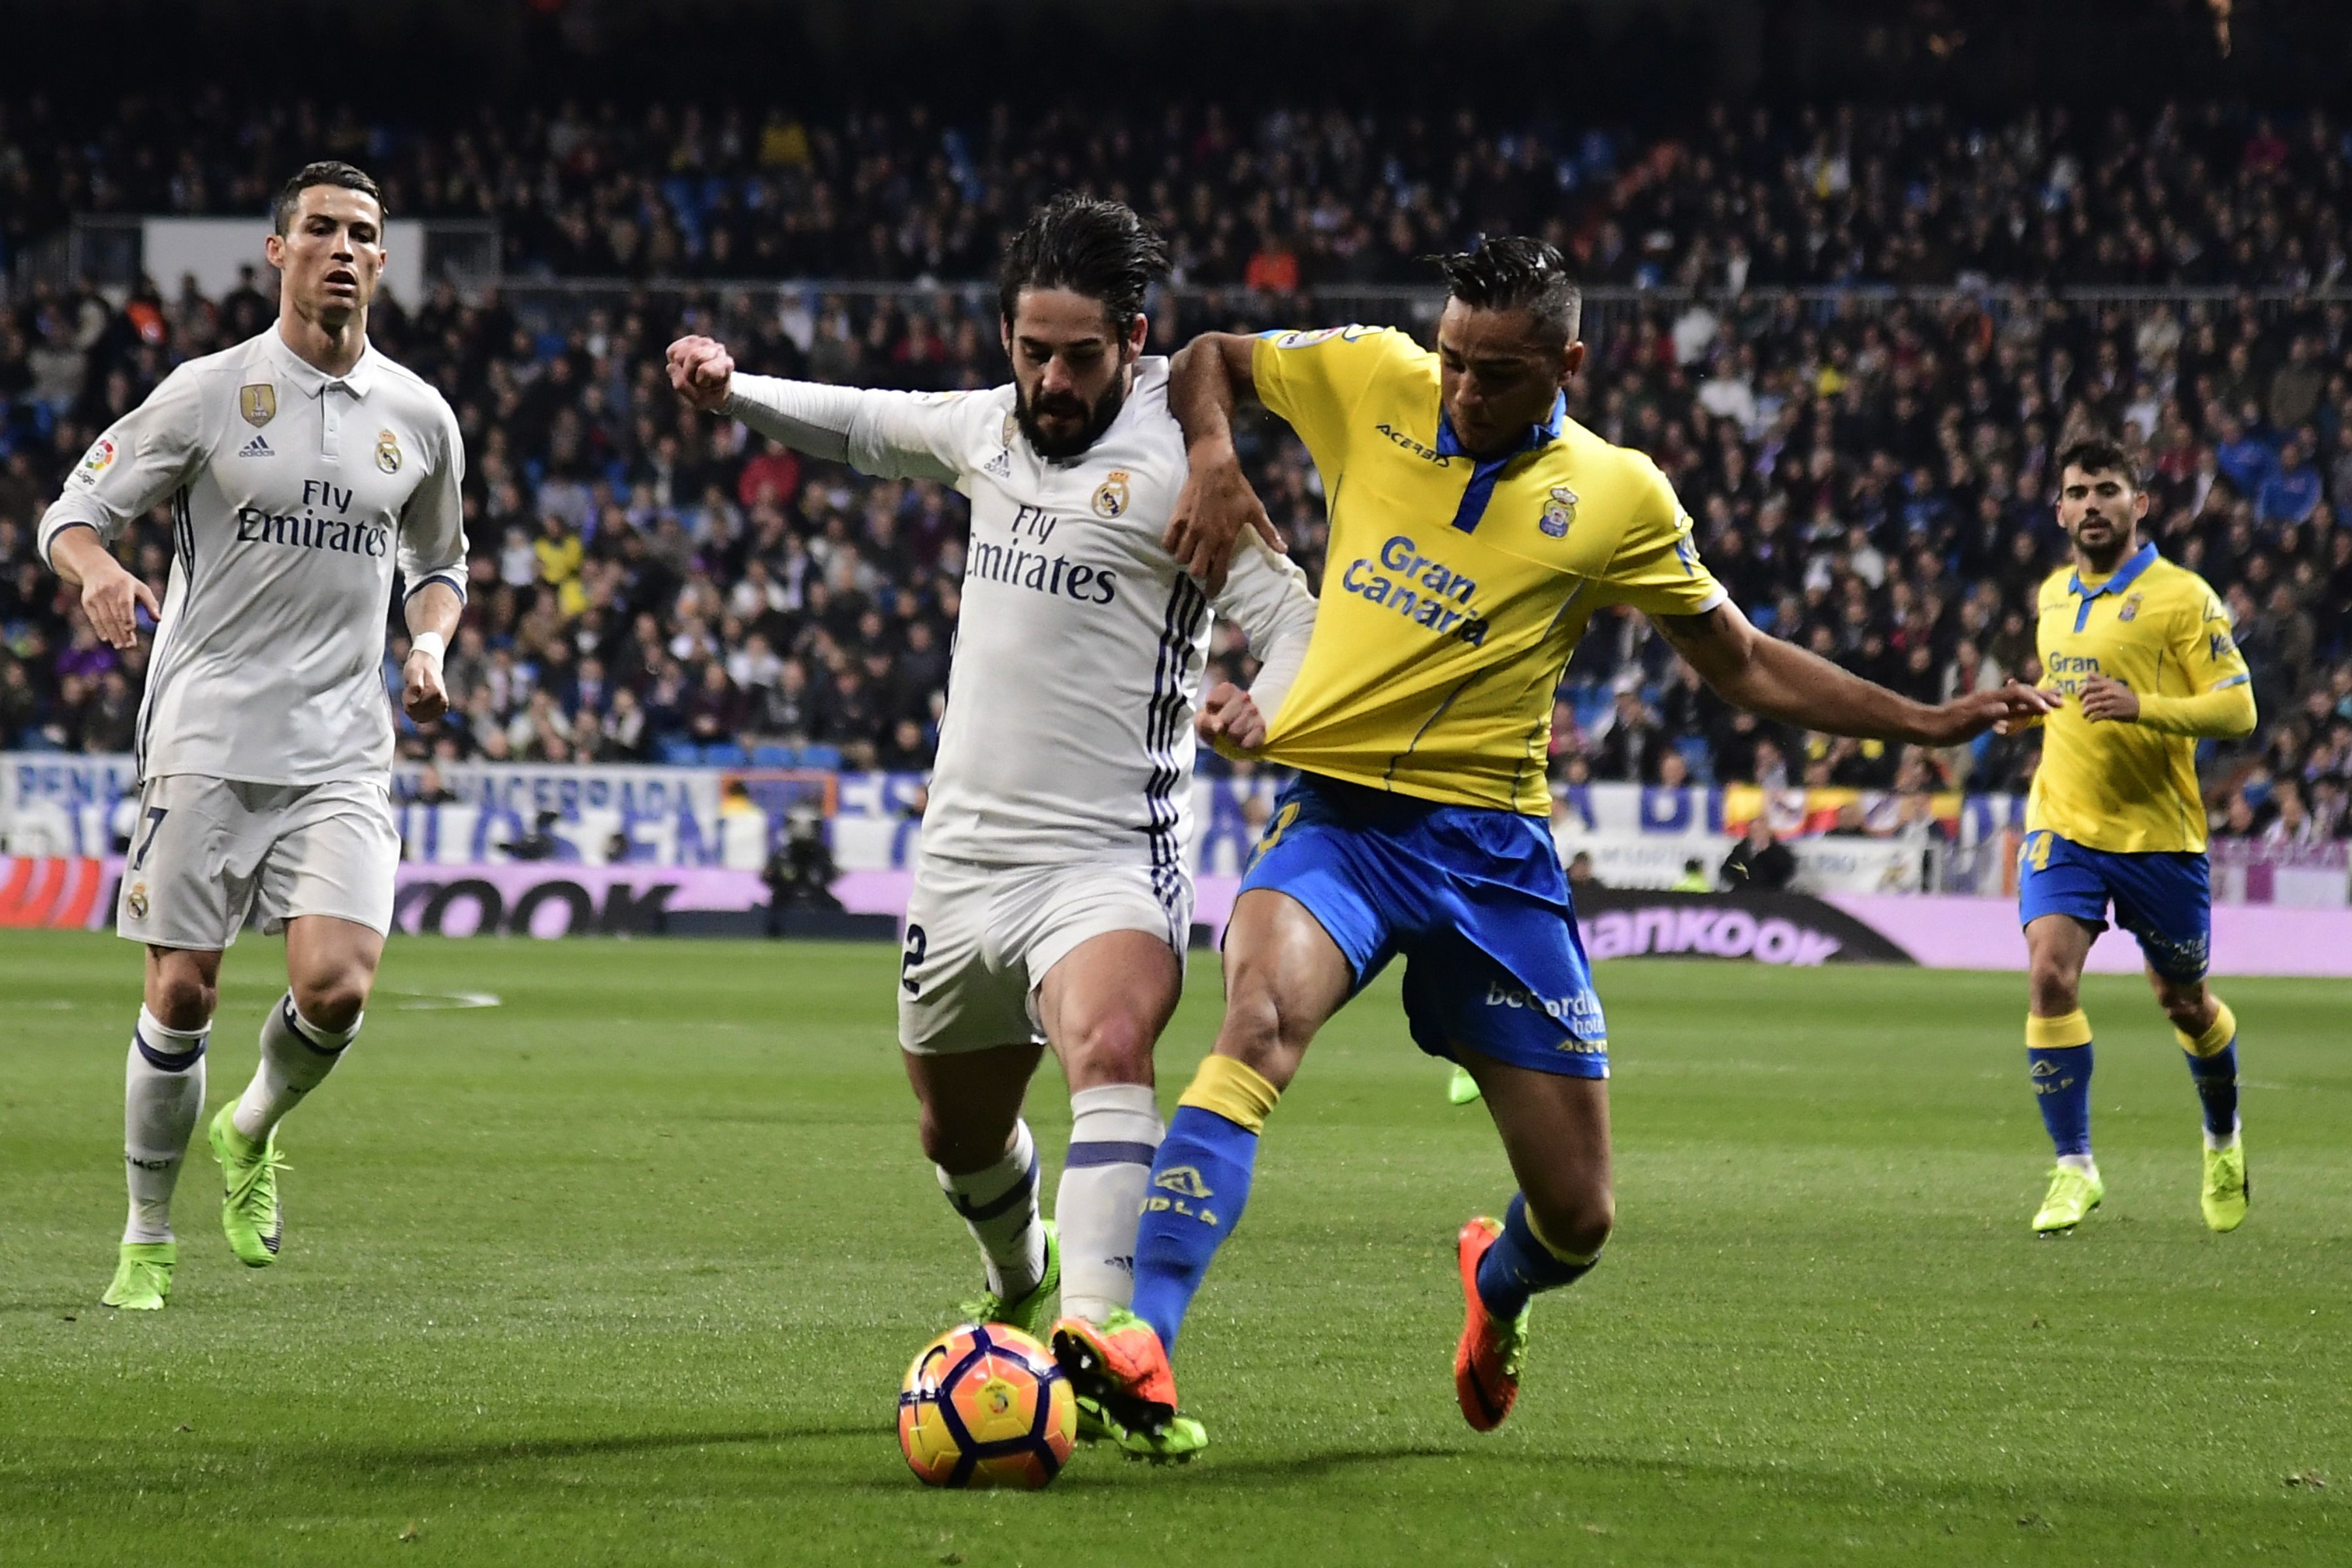 Real Madrid's midfielder Isco (2ndL) vies with Las Palmas' defender David Simon during the Spanish league football match Real Madrid CF vs UD Las Palmas at the Santiago Bernabeu stadium in Madrid on March 1, 2017. / AFP PHOTO / JAVIER SORIANO        (Photo credit should read JAVIER SORIANO/AFP/Getty Images)